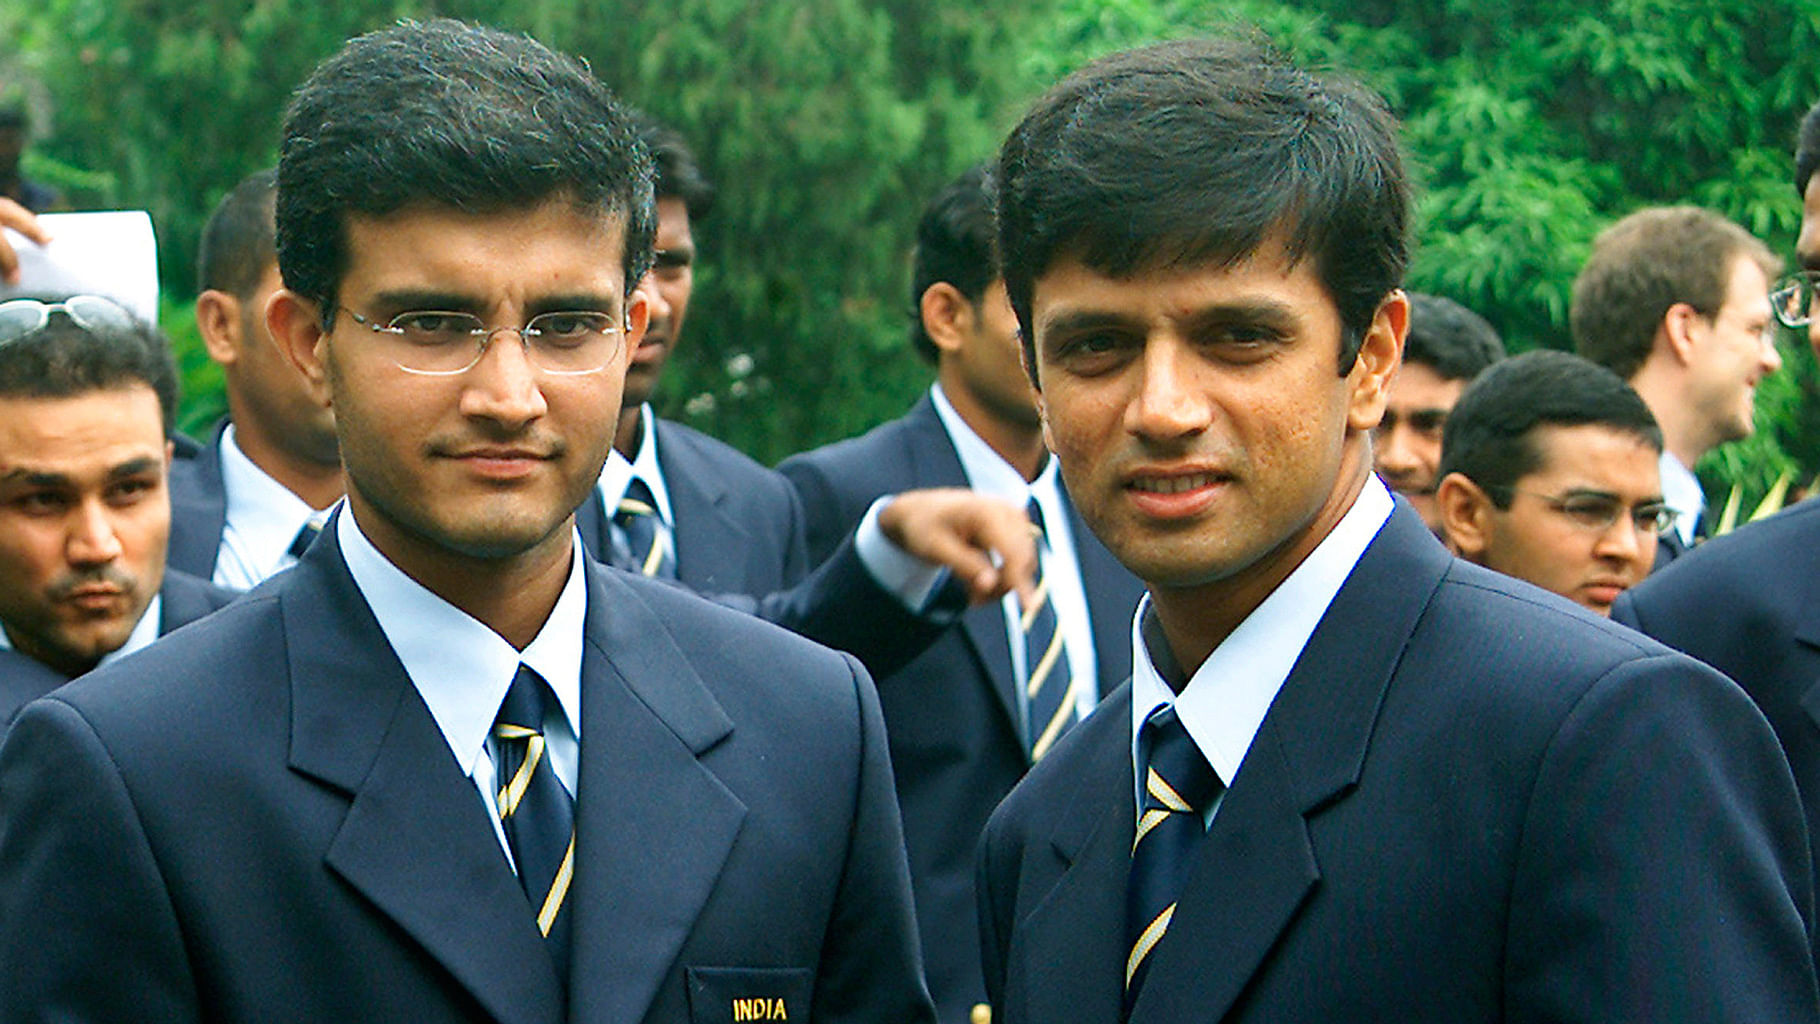 File photo of Sourav Ganguly and Rahul Dravid. (Photo: Reuters)